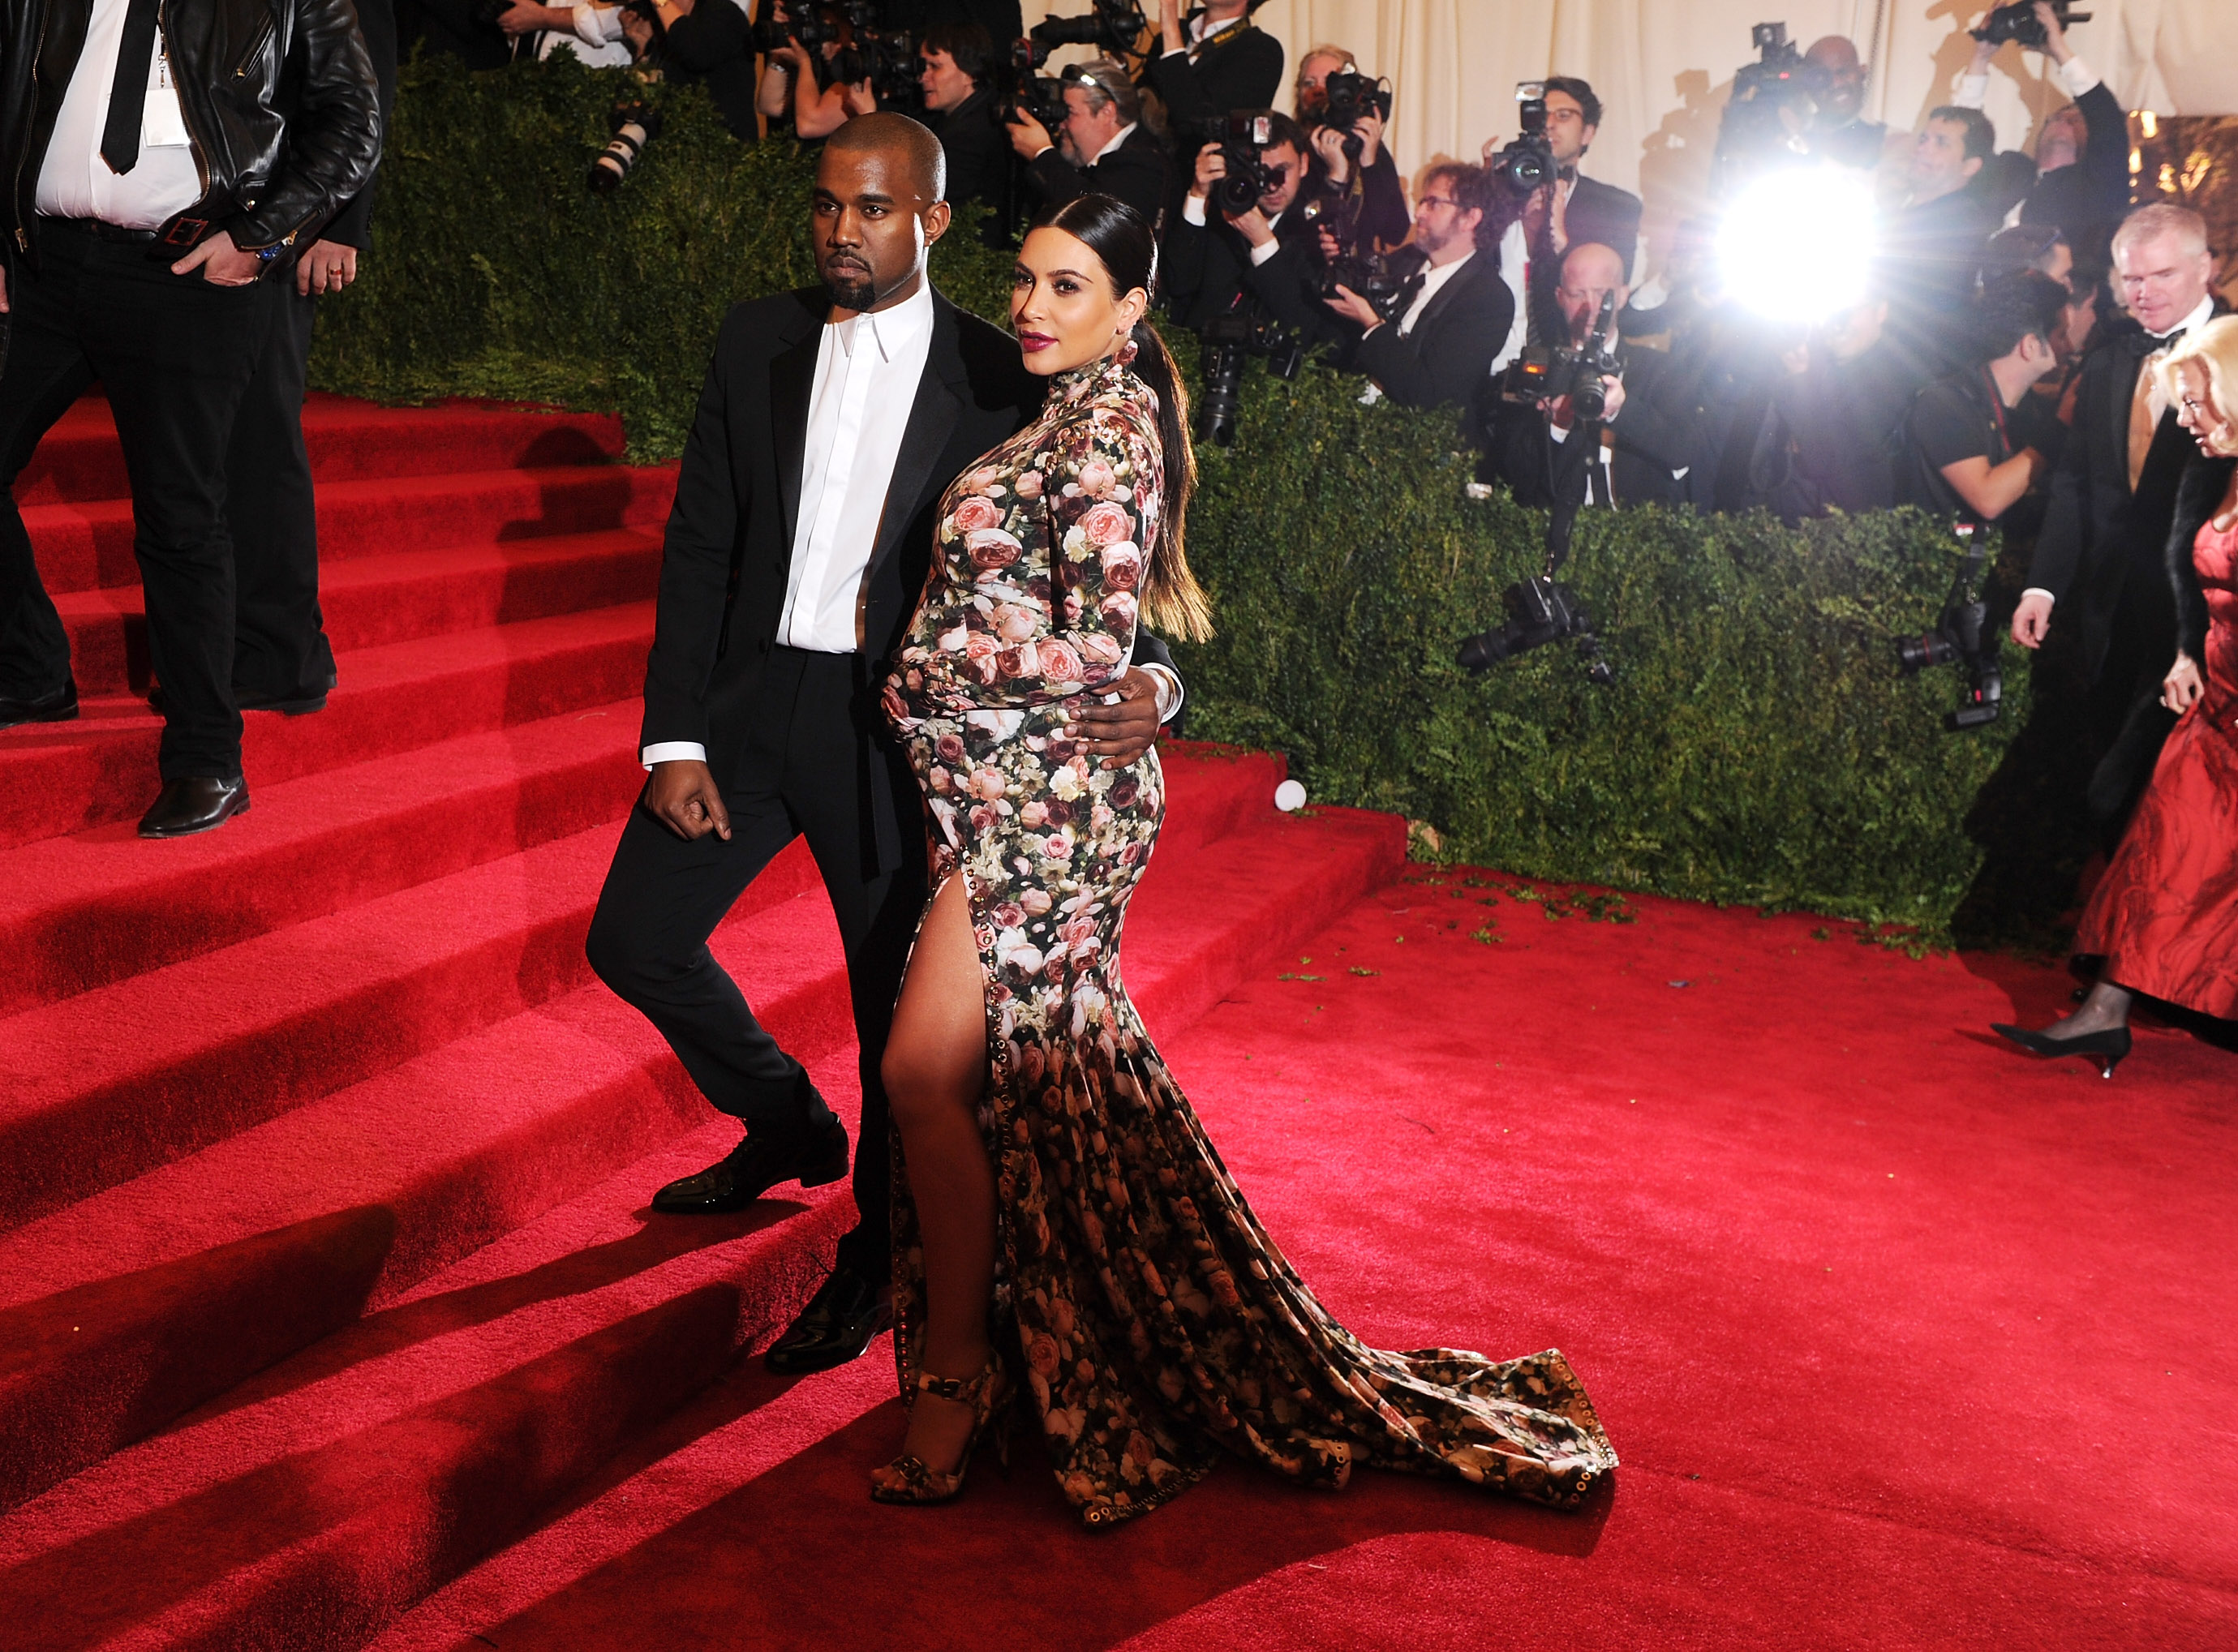 NEW YORK, NY - MAY 06: Kanye West and Kim Kardashian attend the Costume Institute Gala for the 